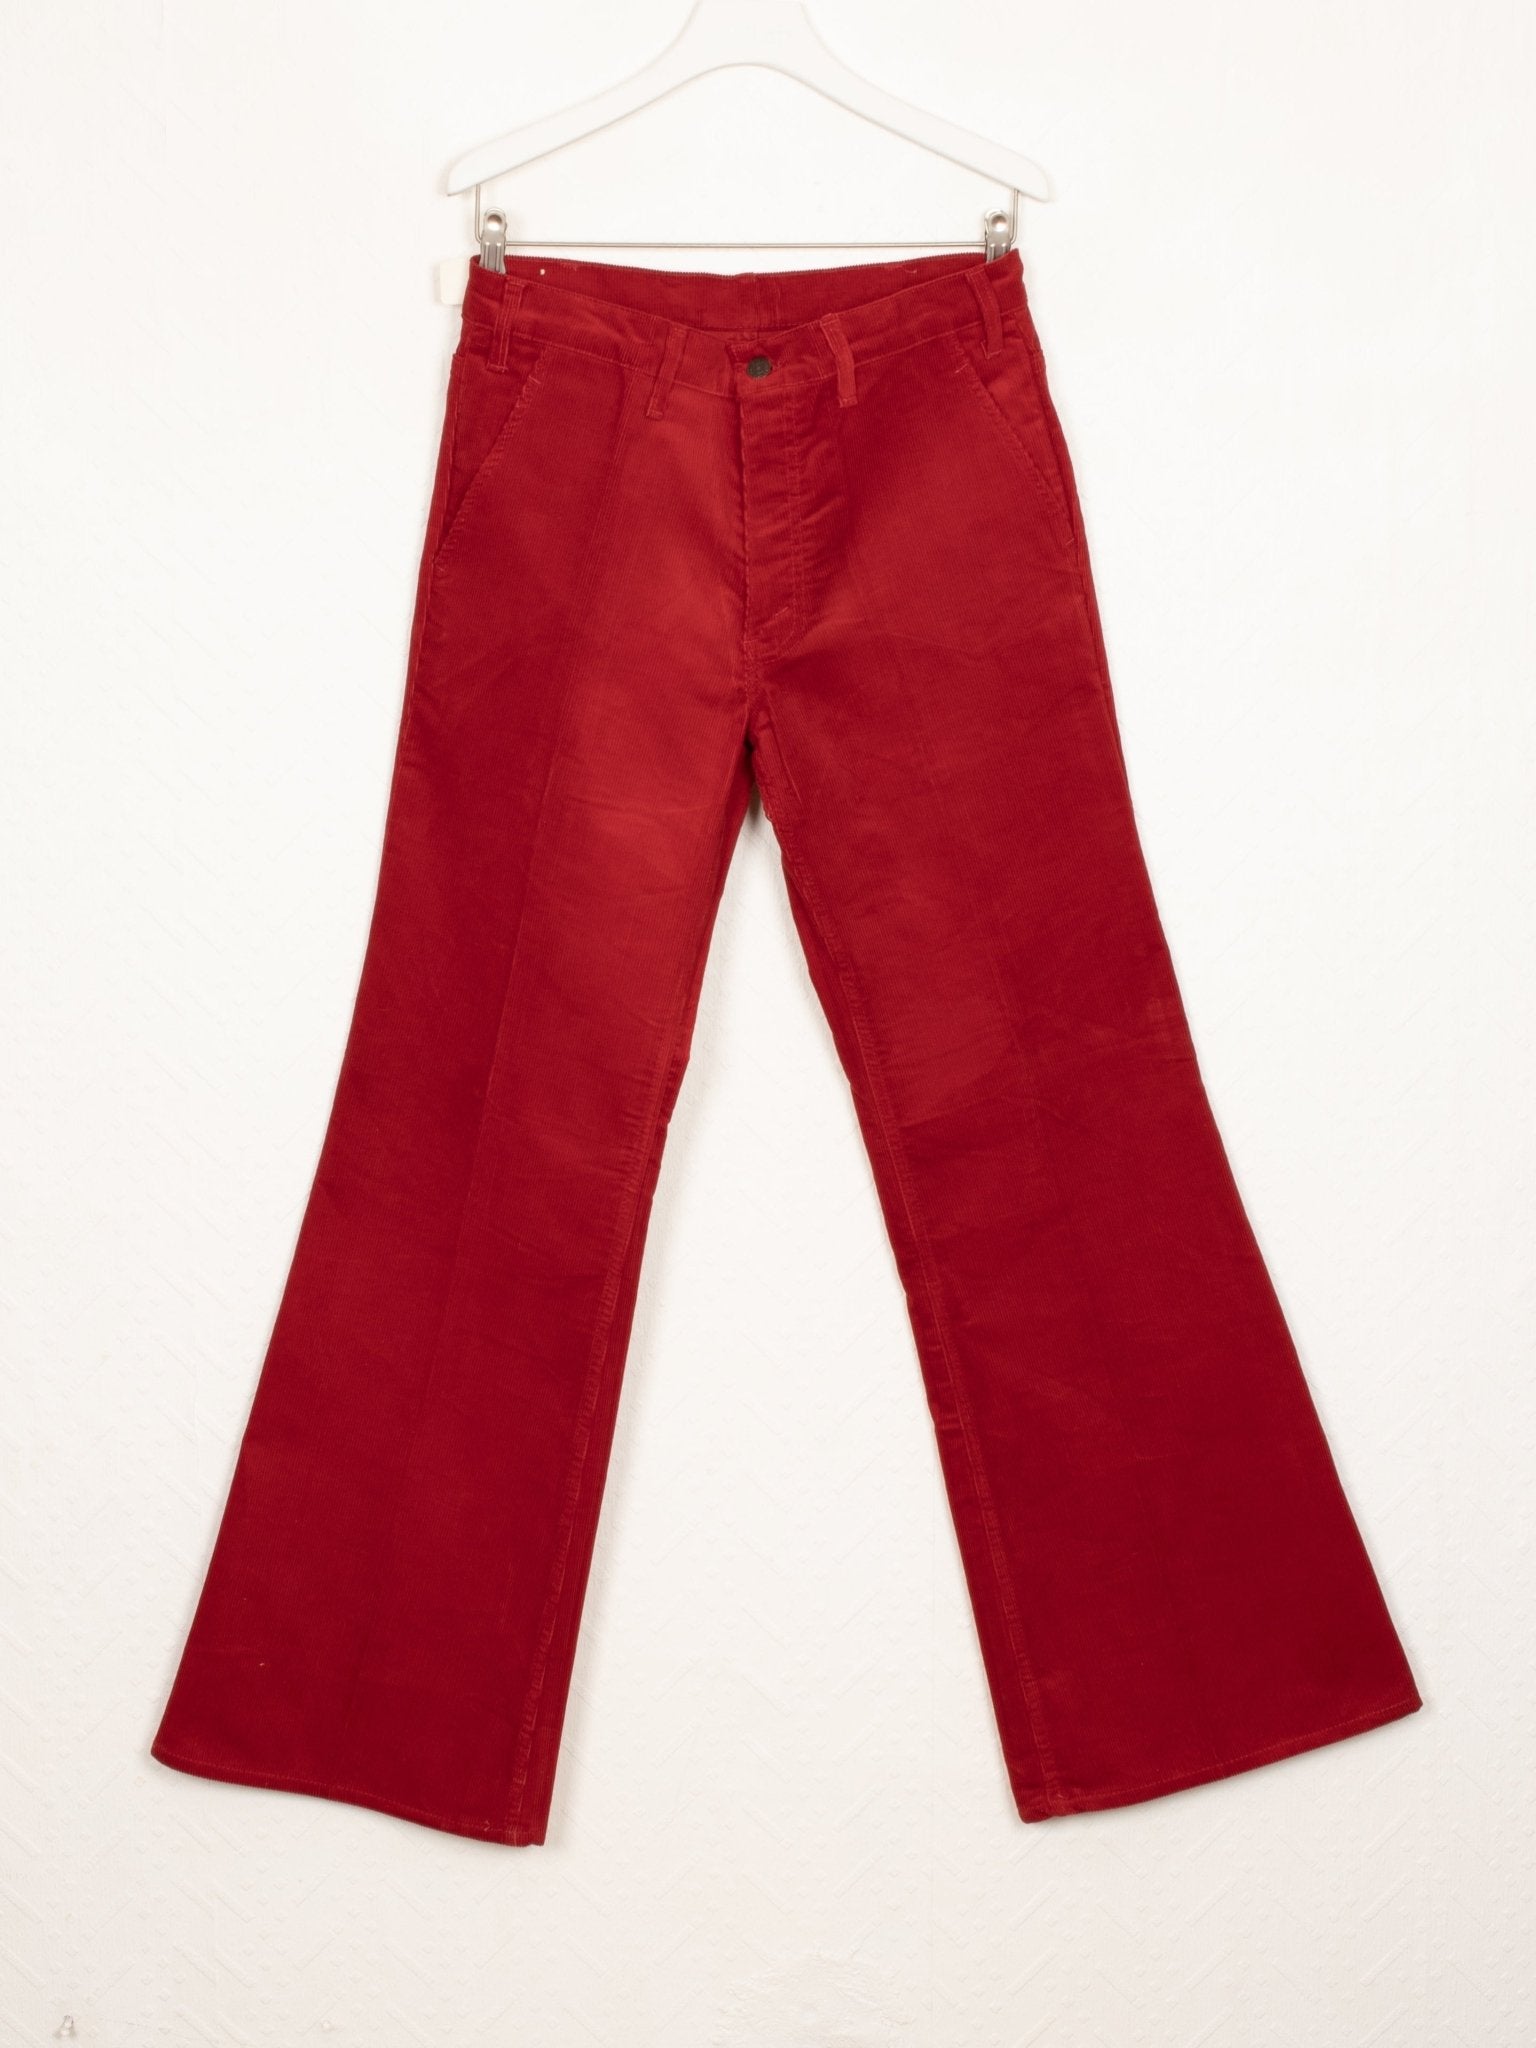 1970s Levi's 640 Scarlet Red Corduroy Flares